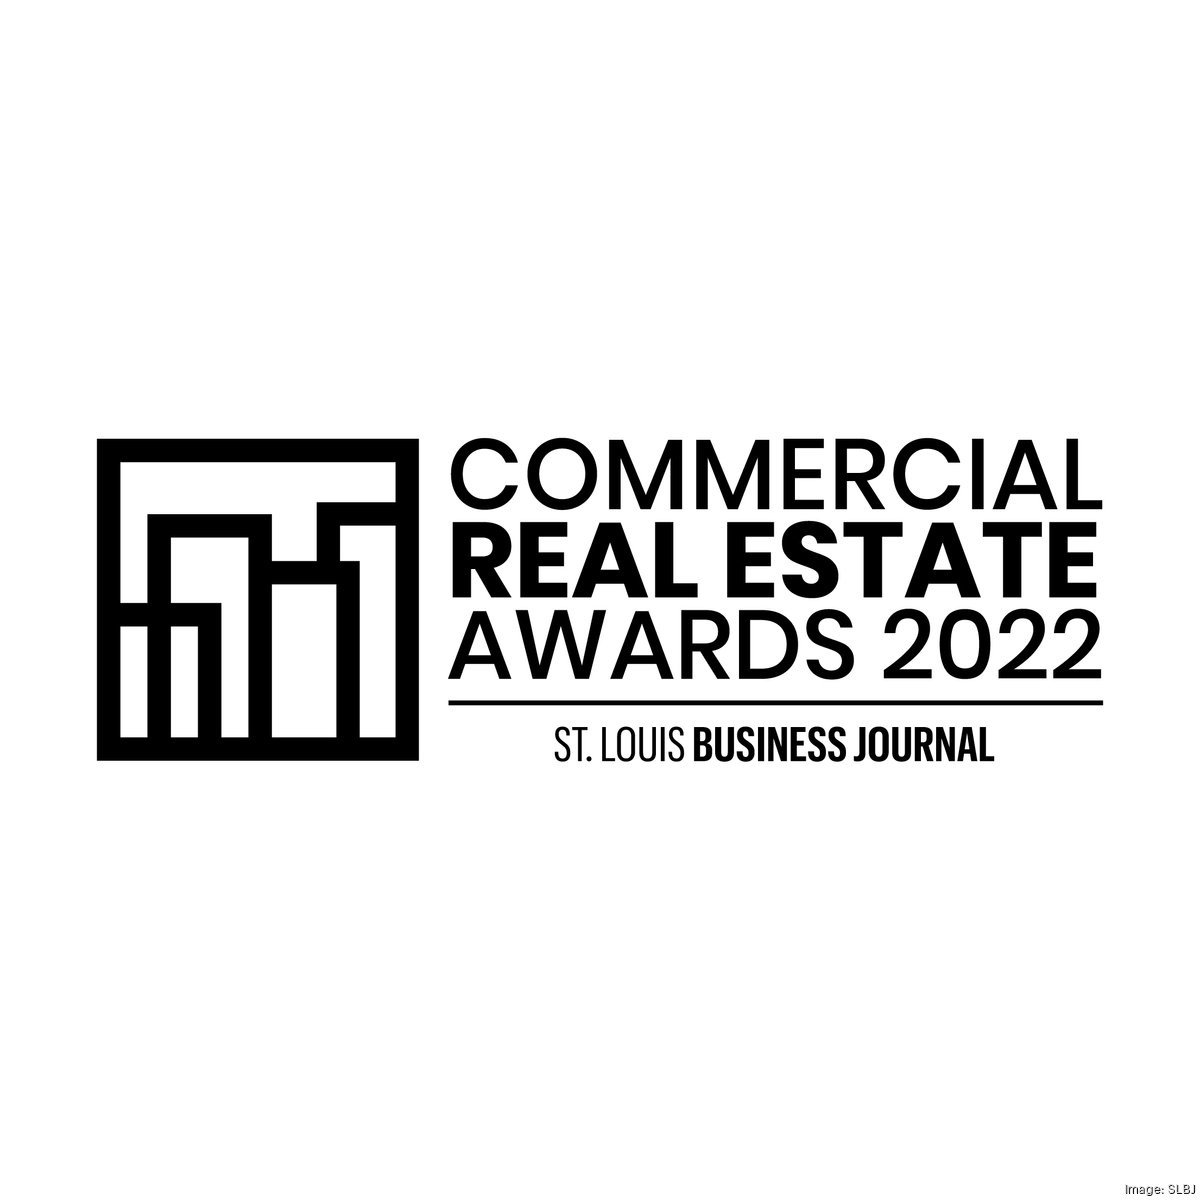 Commercial Real Estate Awards 2022: Stars Park renovation honors